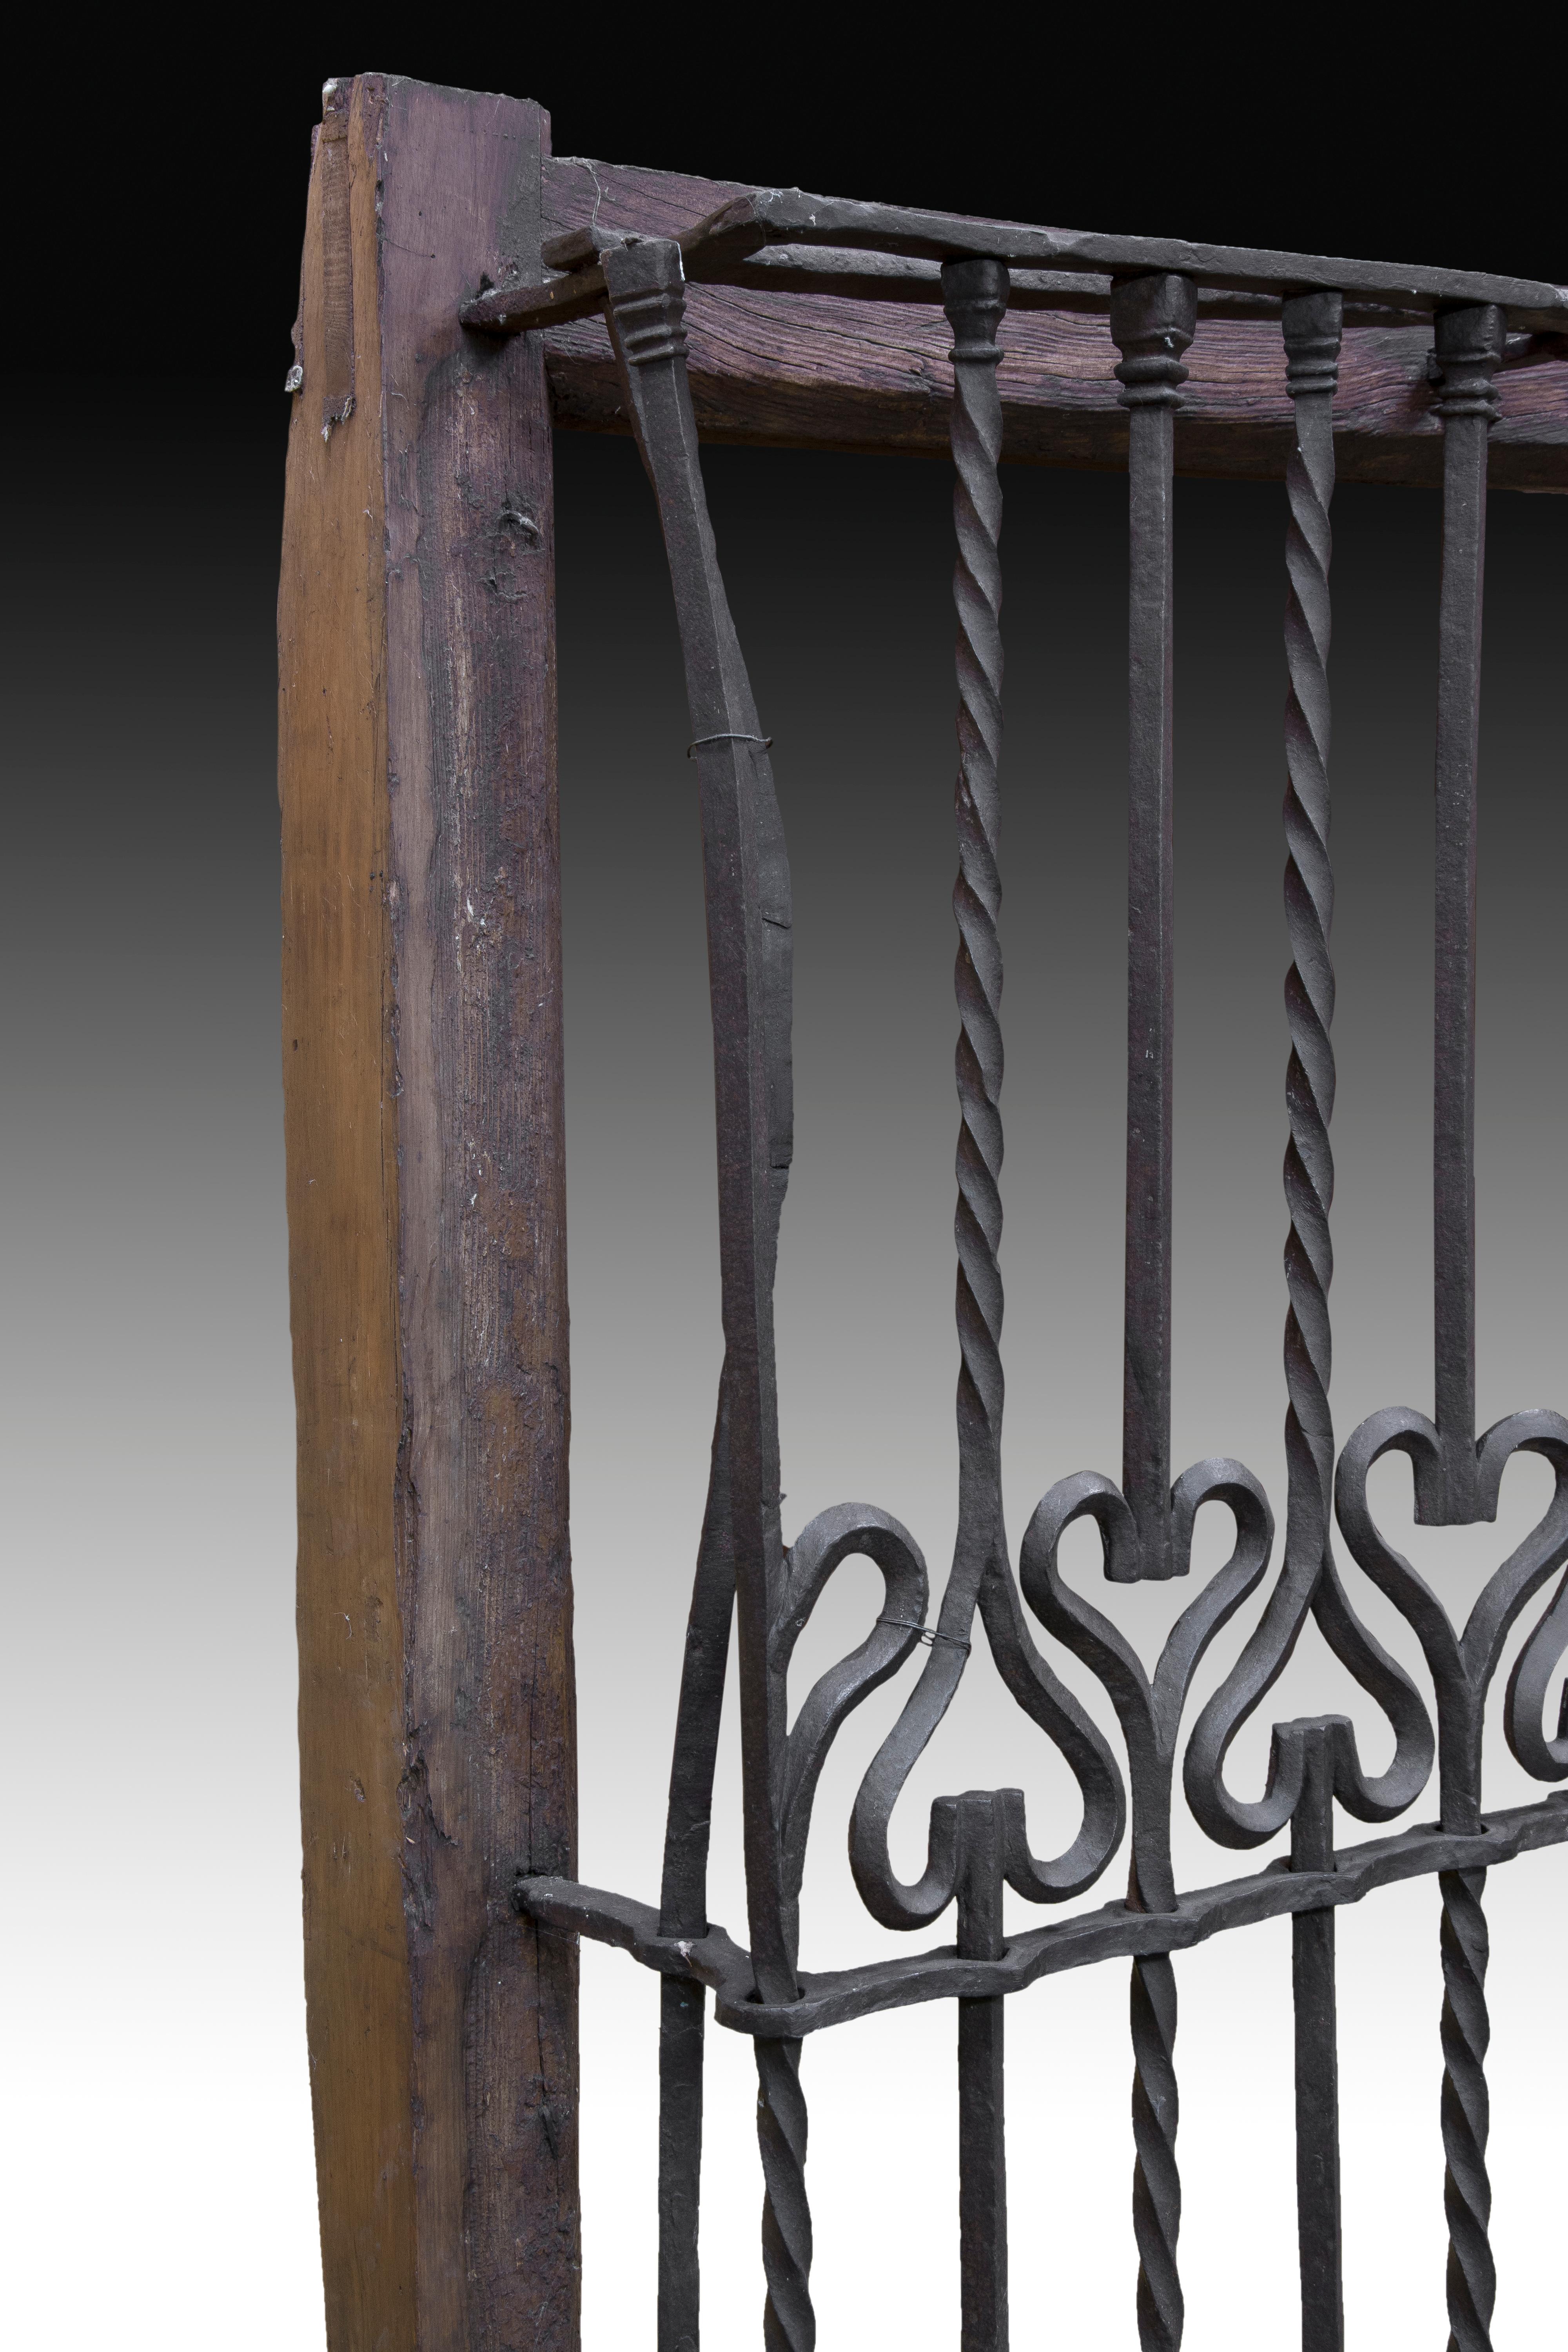 A carved wooden frame serves as a support for the wrought iron grille that has decorated balusters: all have a heart-shaped form in the centre, while the axes are smooth above and spiral below where the heart is upwards, and spirals up and smooth